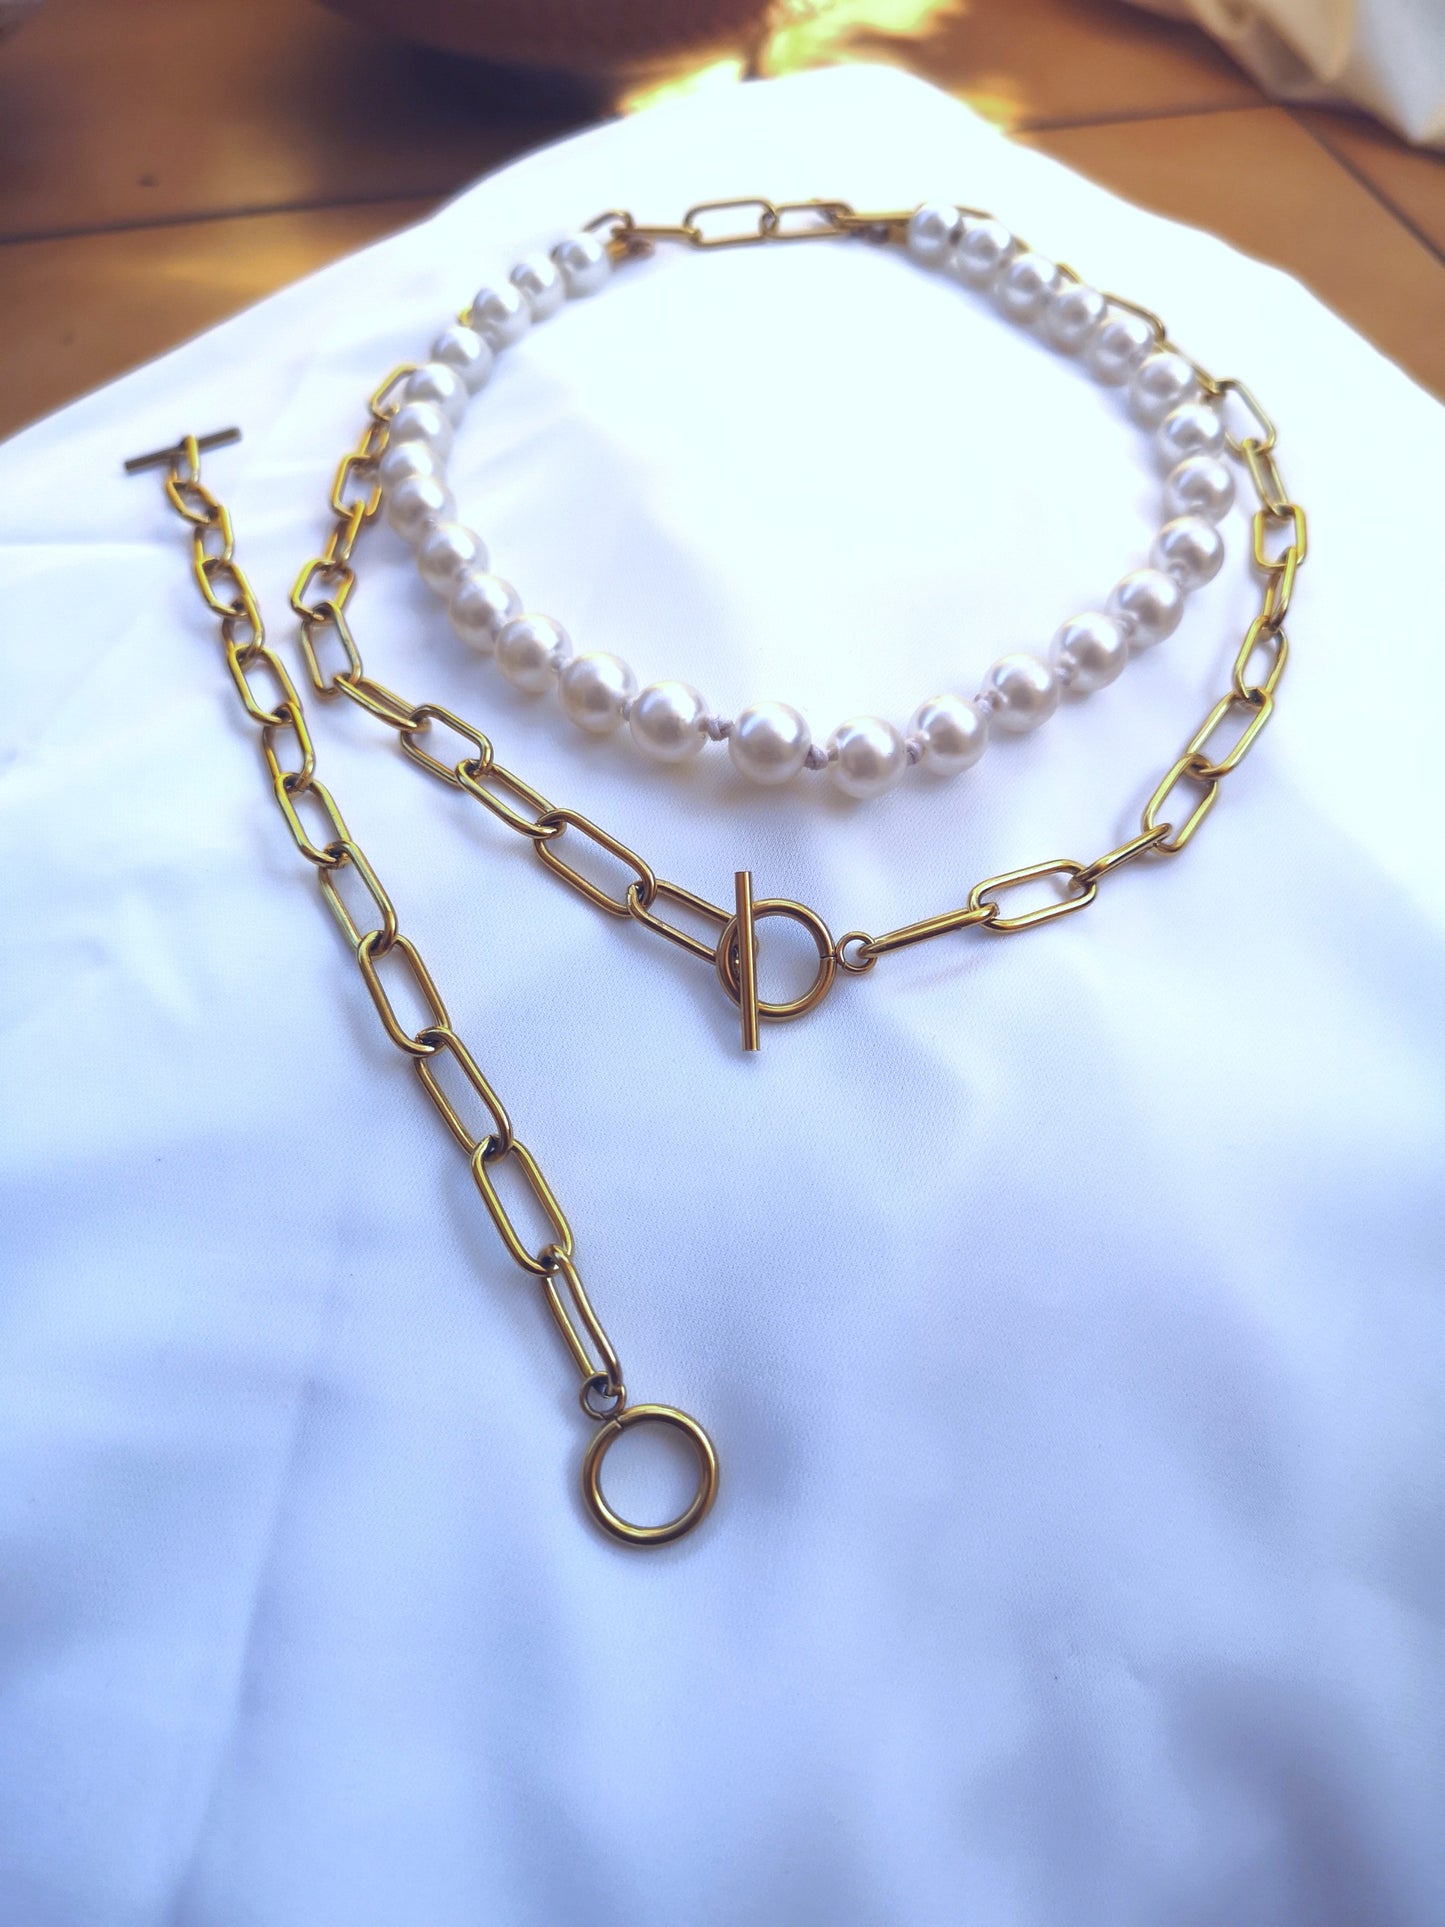 stainless steel chain and bracelet sets with its adjustable pearl necklace